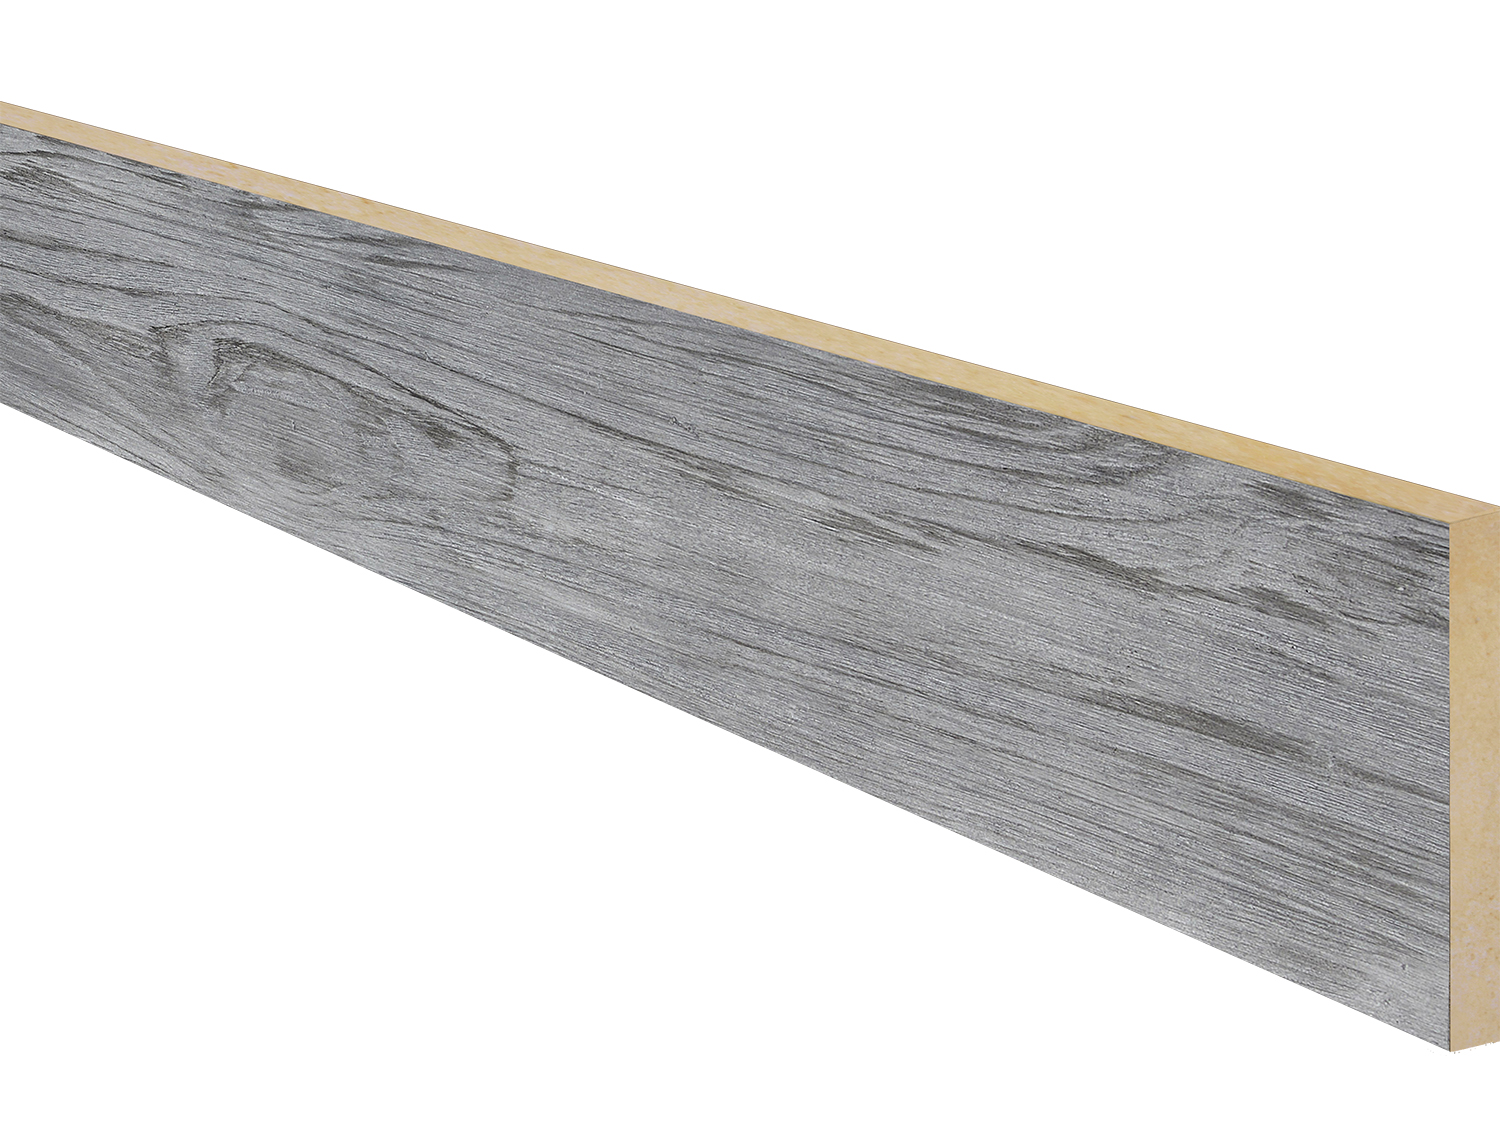 Driftwood Faux Wood Planks